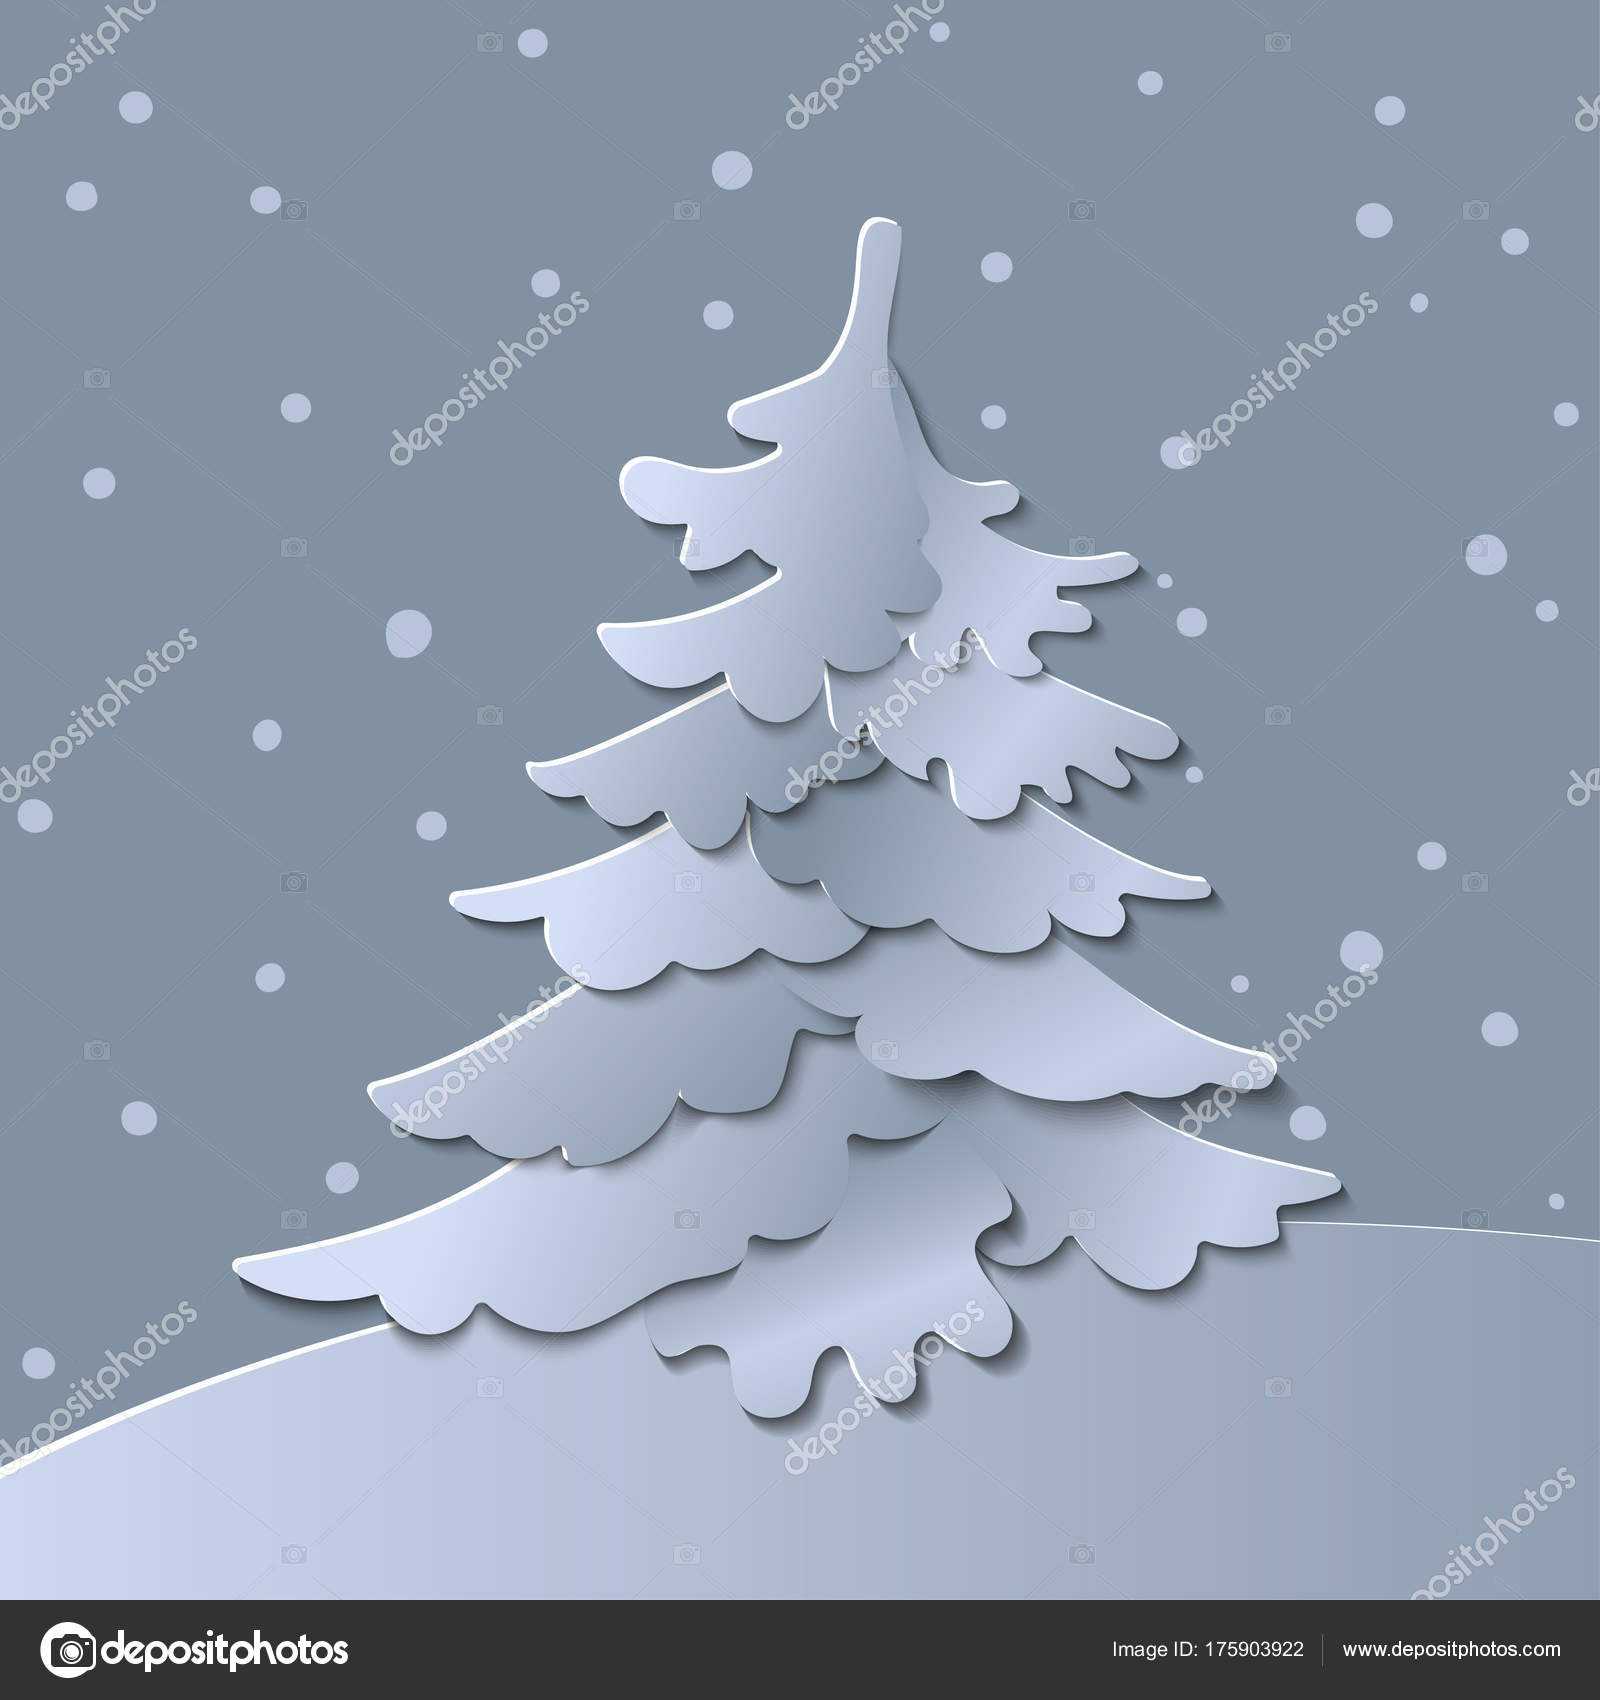 3D Abstract Paper Cut Illustration Of Christmas Tree. Vector With 3D Christmas Tree Card Template